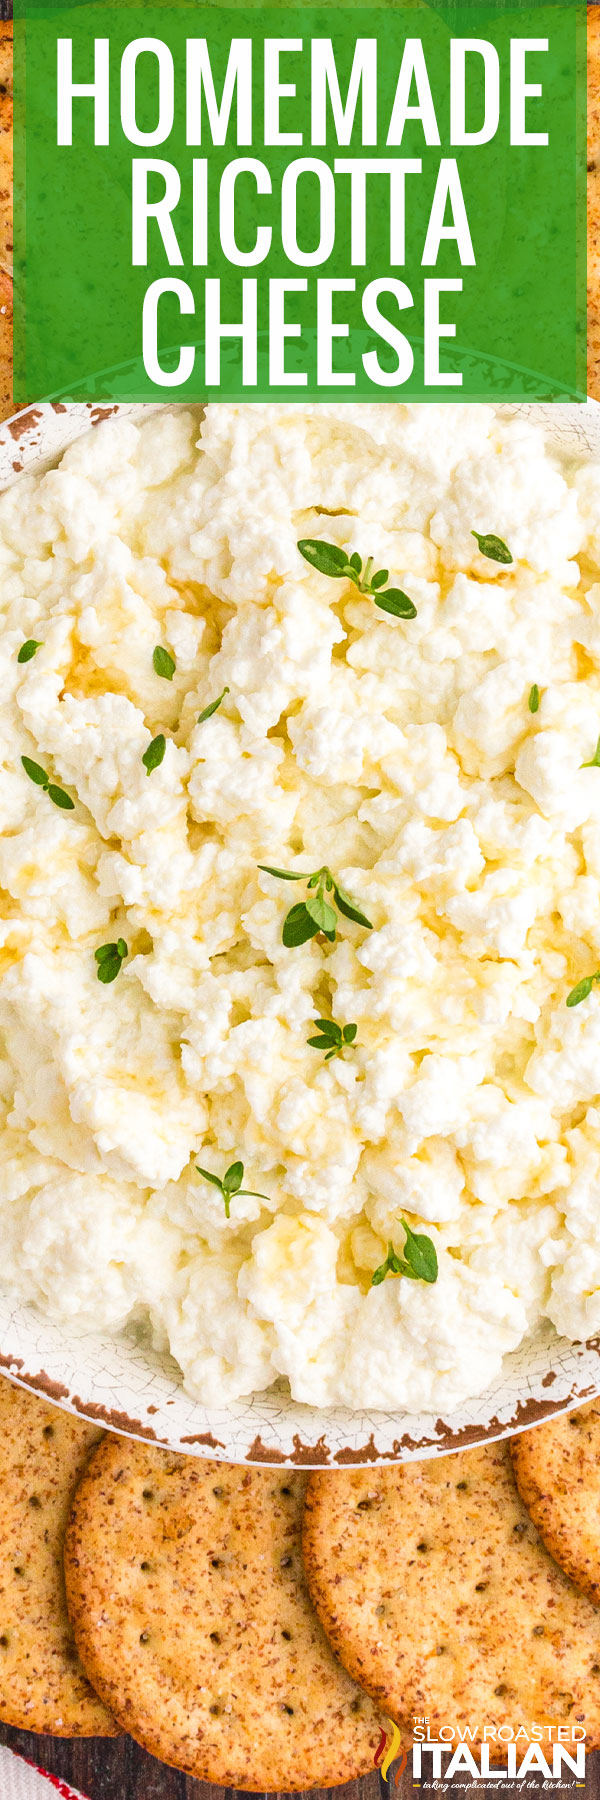 titled image (and shown): homemade ricotta cheese recipe